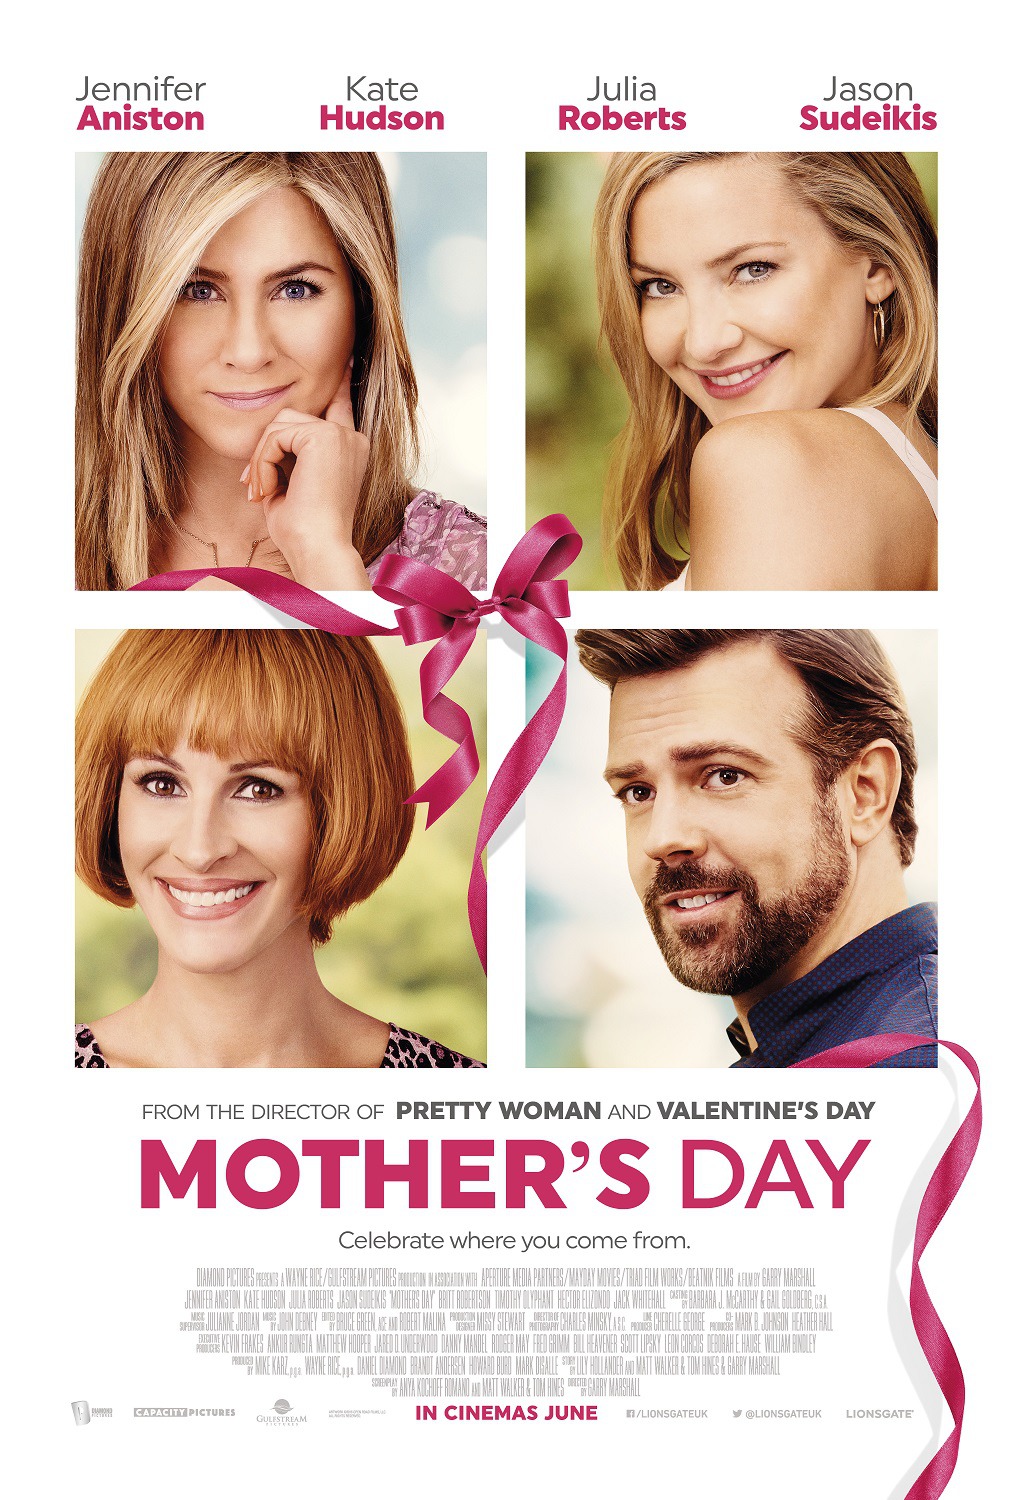 MOTHER'S DAY Trailers, Images and Poster The Entertainment Factor